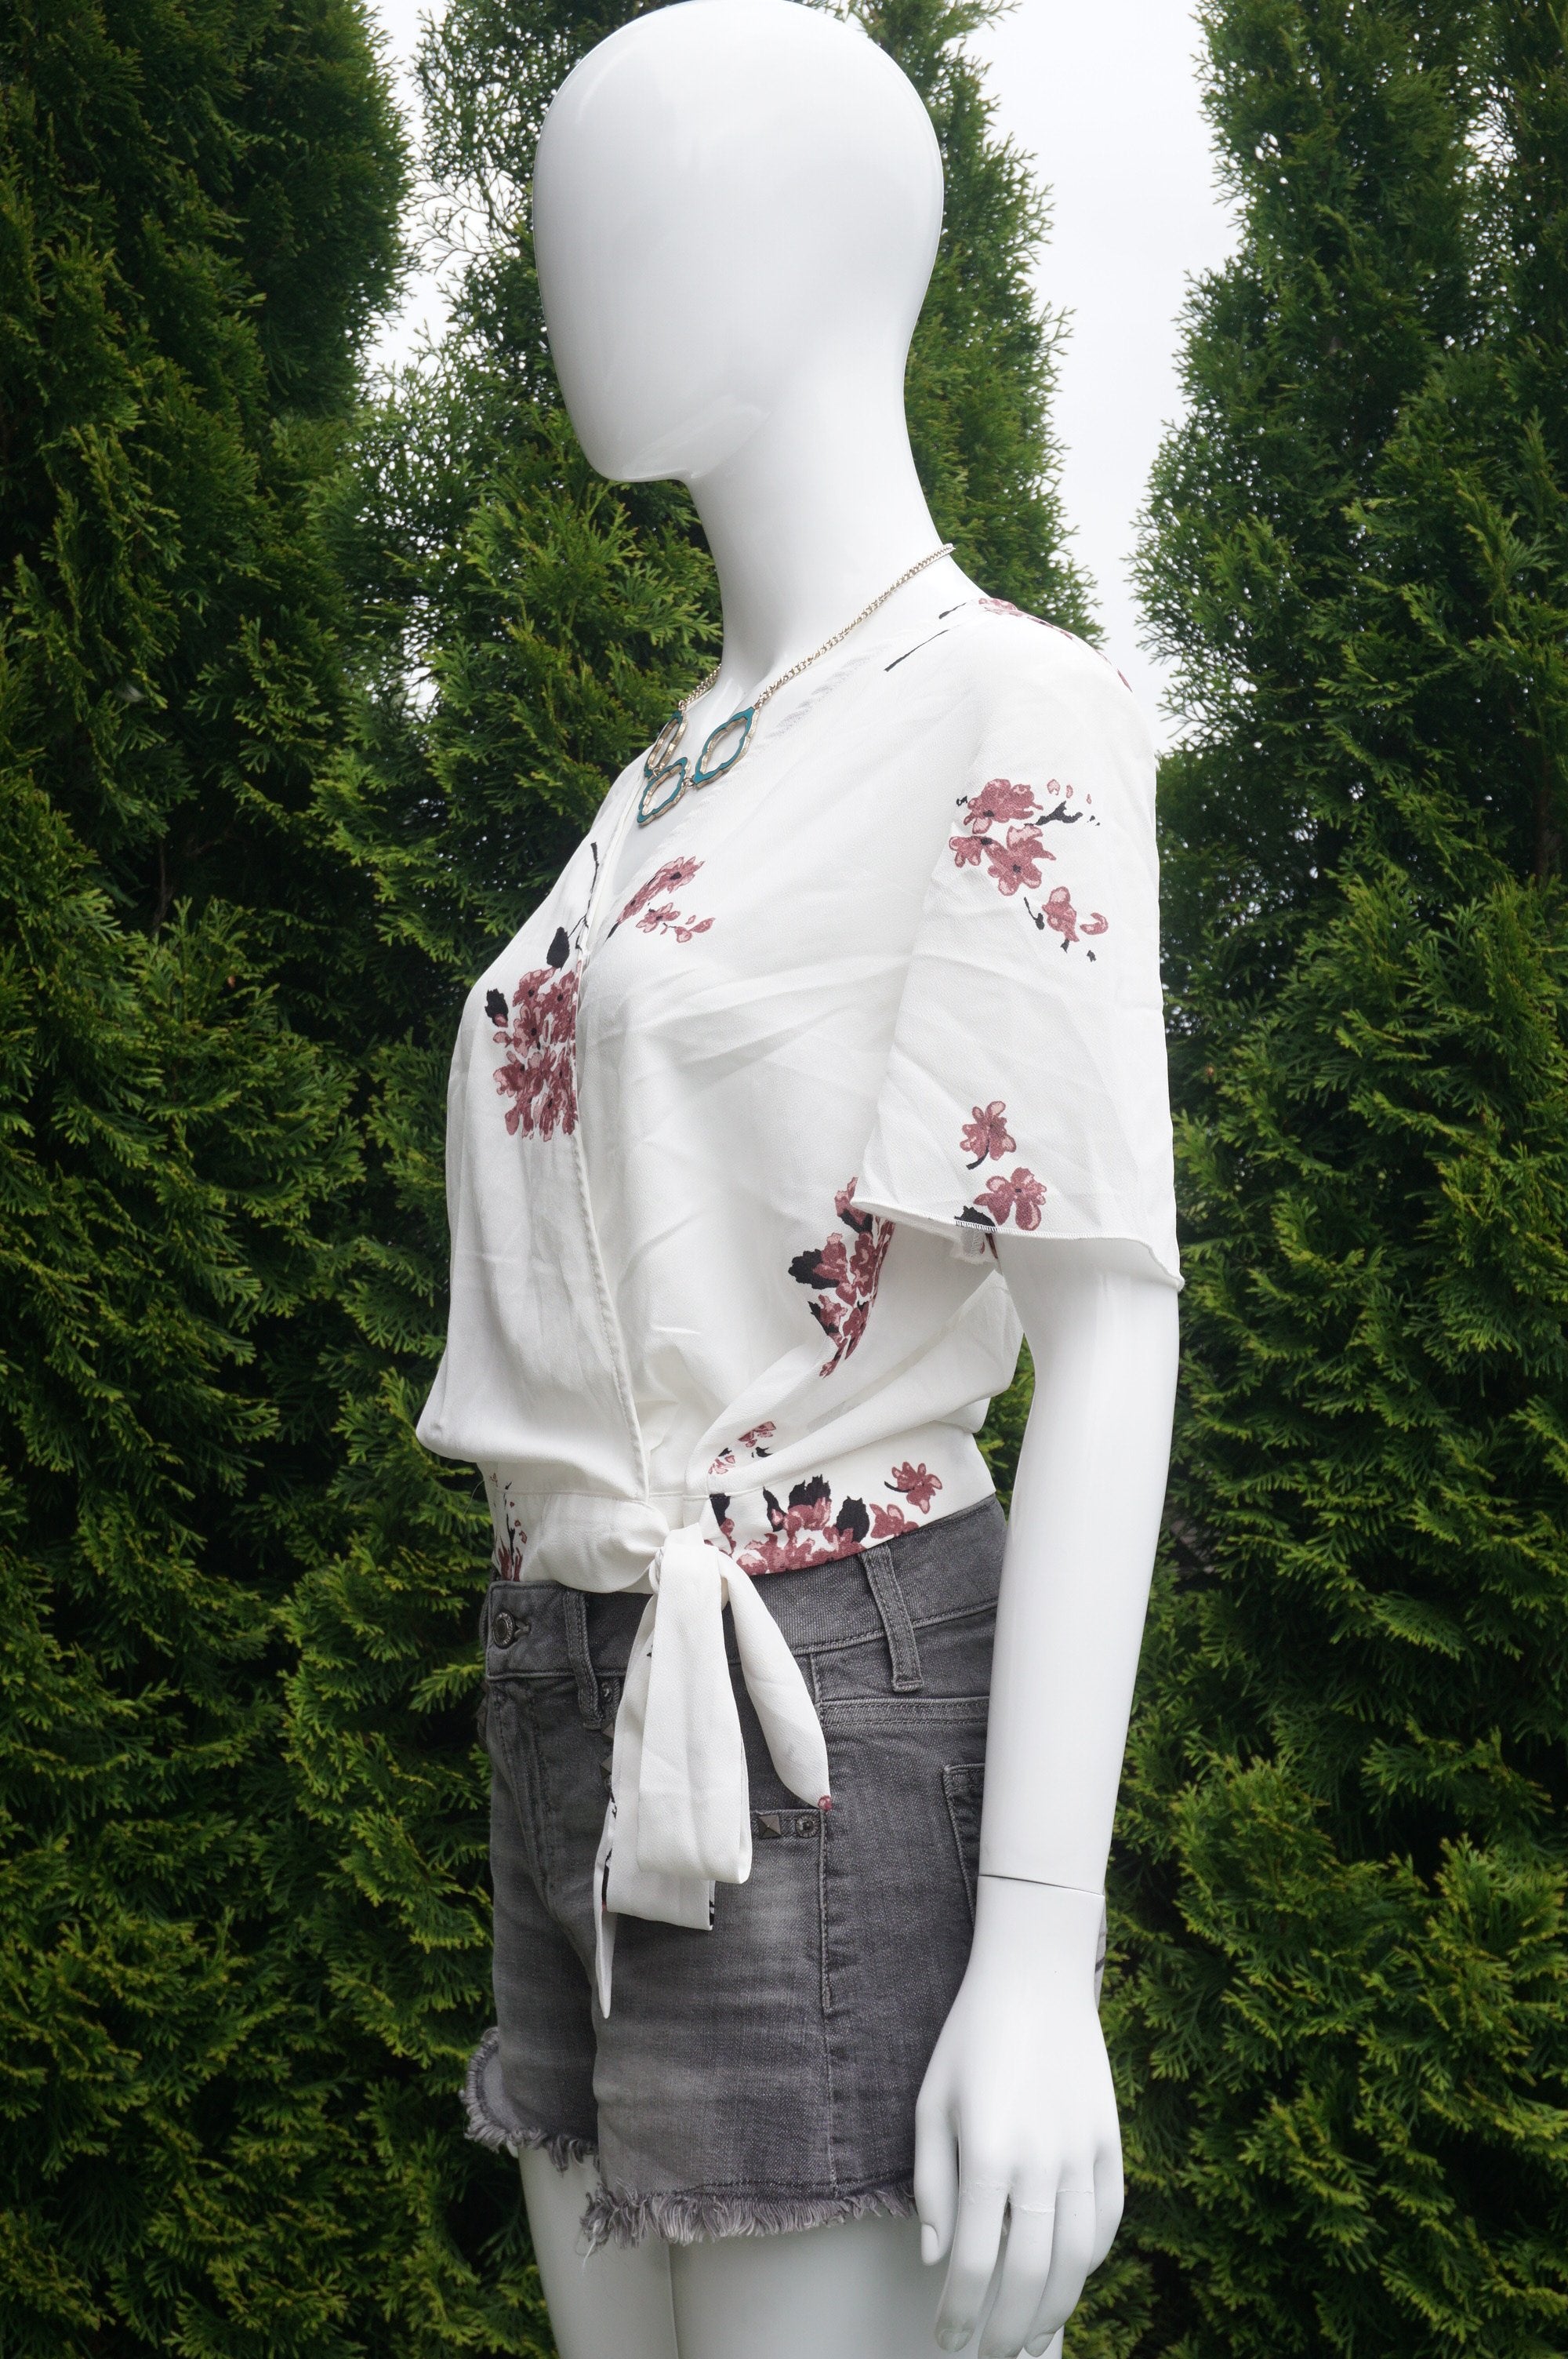 Dynamite Cute Floral Wrap Front Blouse, This cute and stylish wrap front top could be your go to top on a hot summer day., White, 100% Polyester, women's Tops, women's White Tops, Dynamite women's Tops, white floral top, summer top, wrap front top, short sleeve summer top, short sleeve wrap top